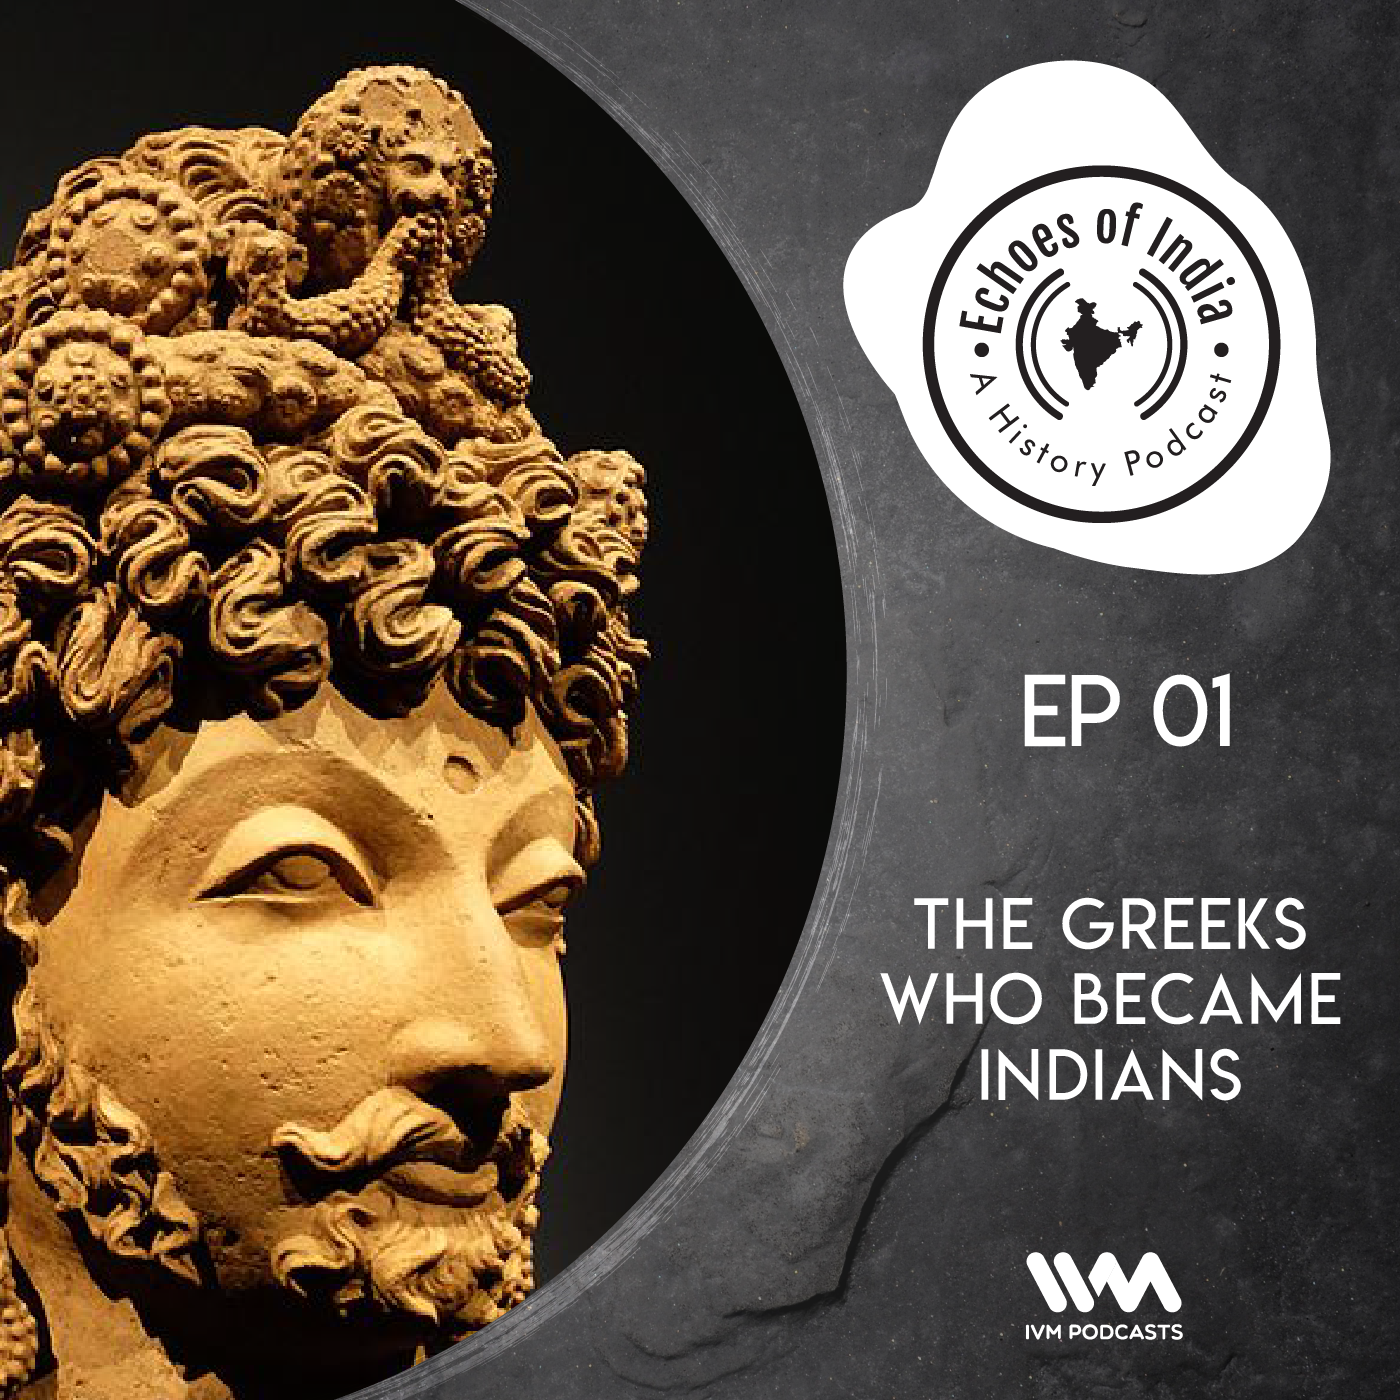 The Greeks Who Became Indians